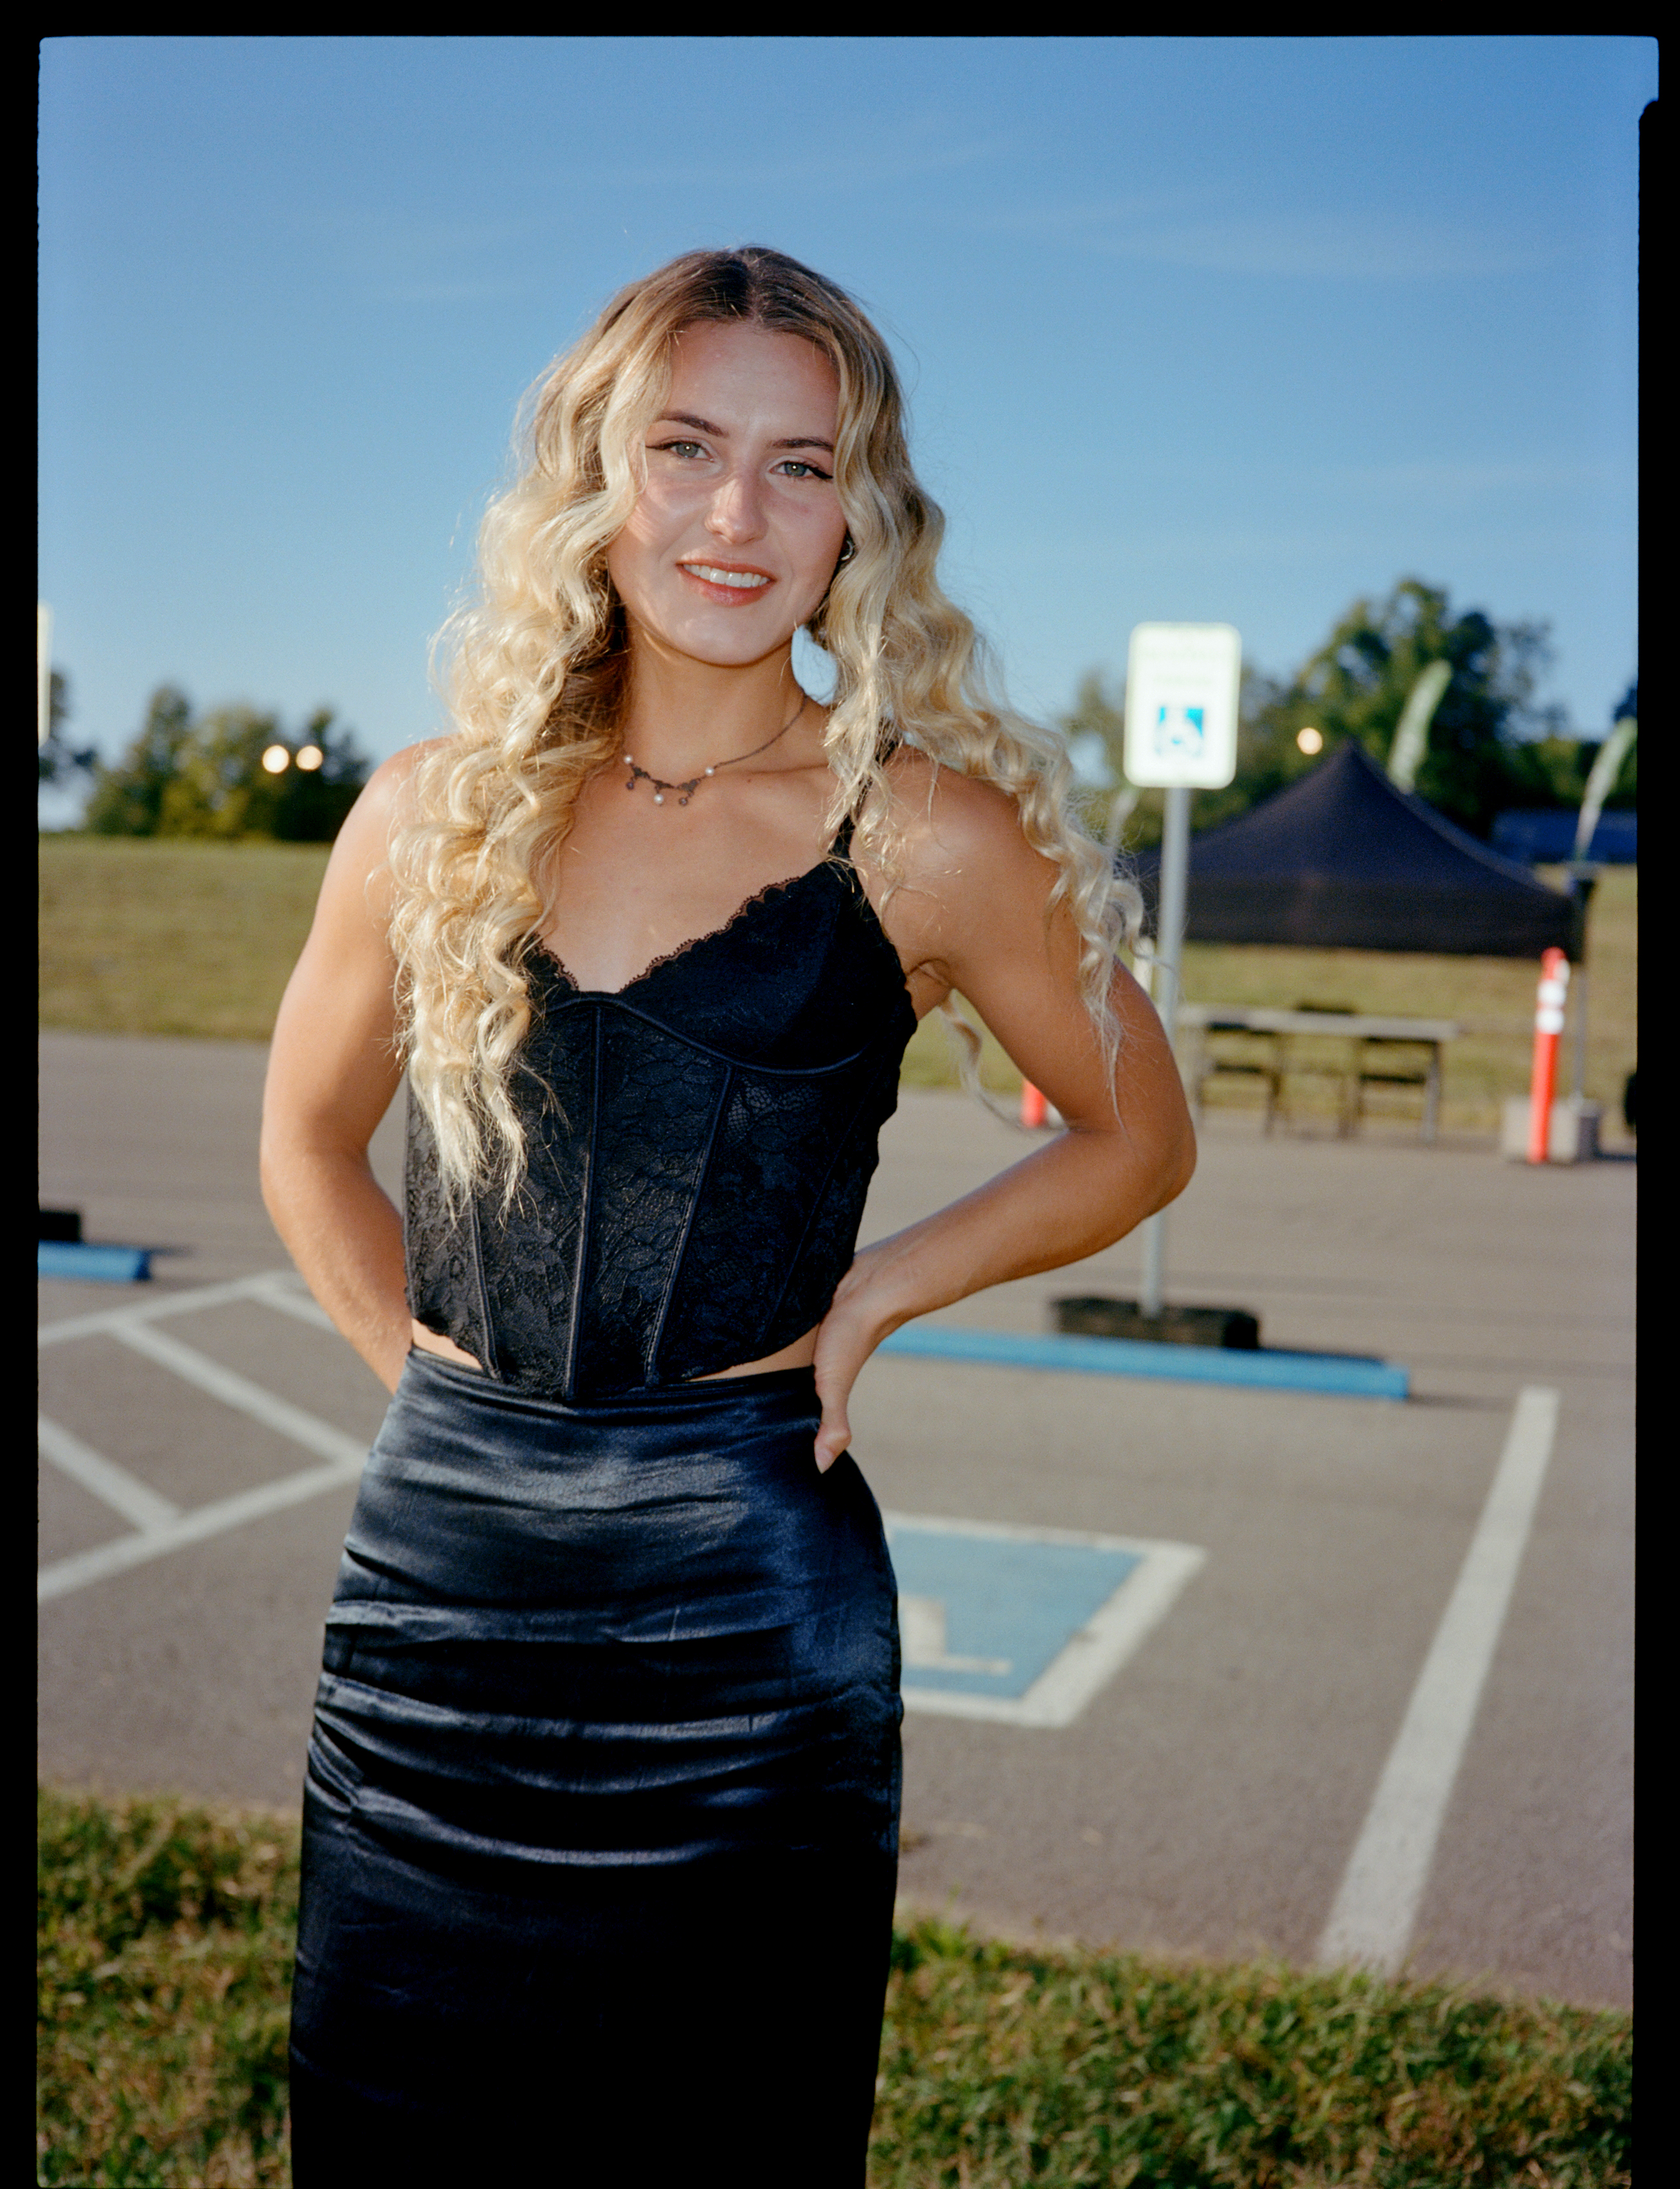 a lana del rey fan stands in a car park wearing a black corset lace top and a black skirt. she has blonde hair and is smiling. 